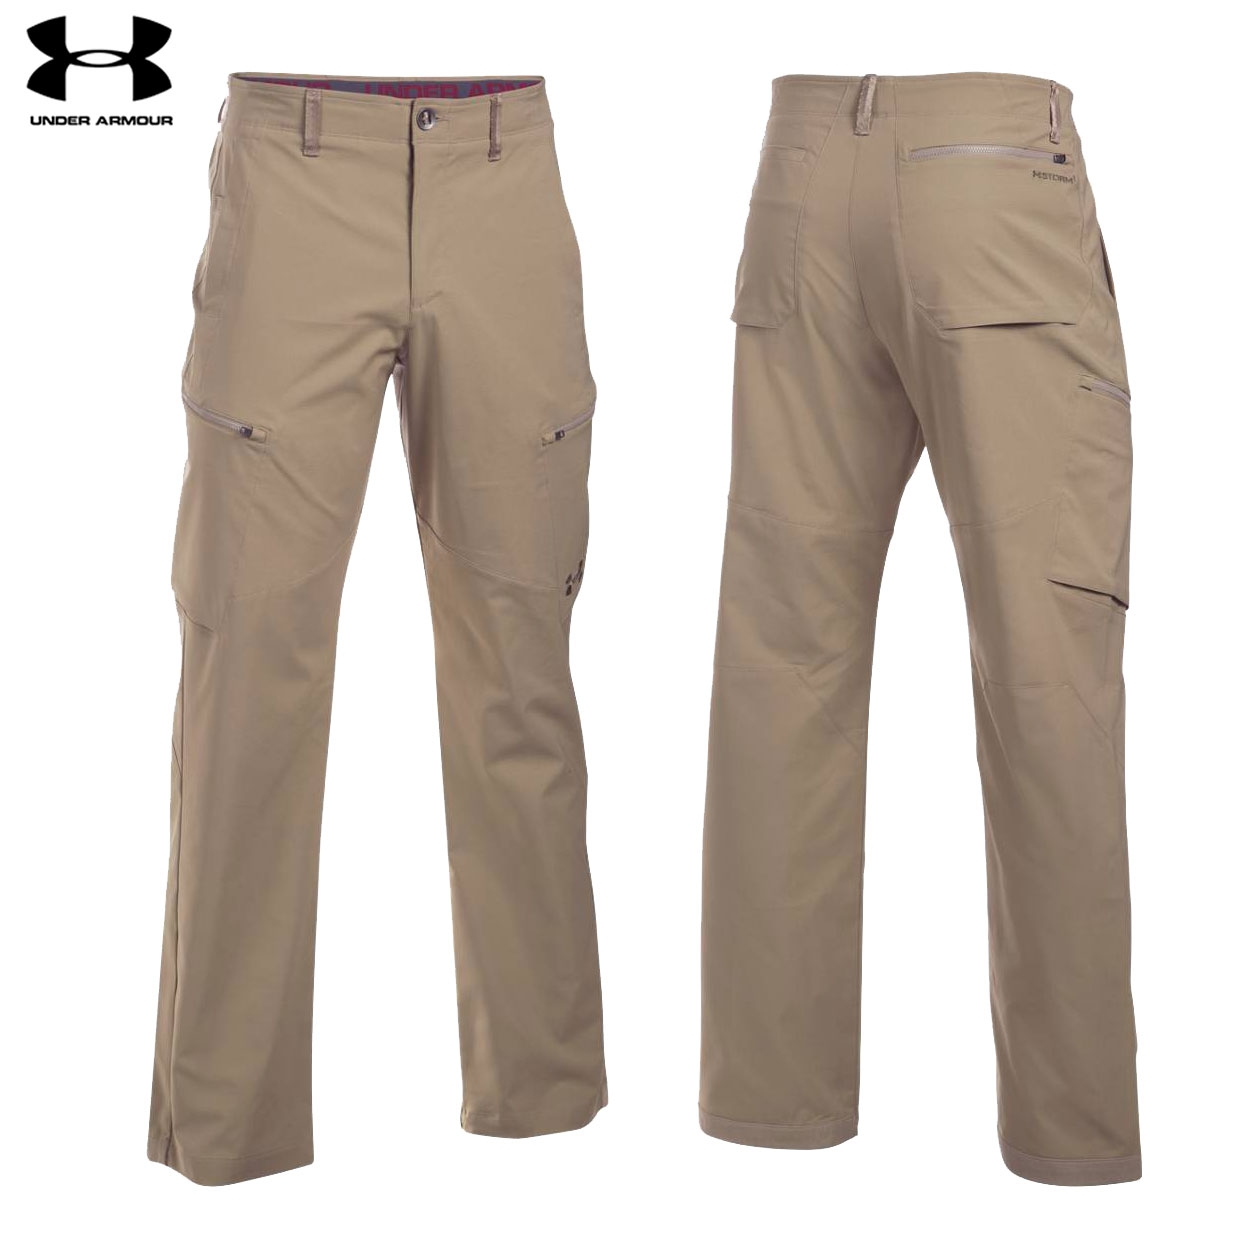 Under Armour Backwater Pants (36x32 